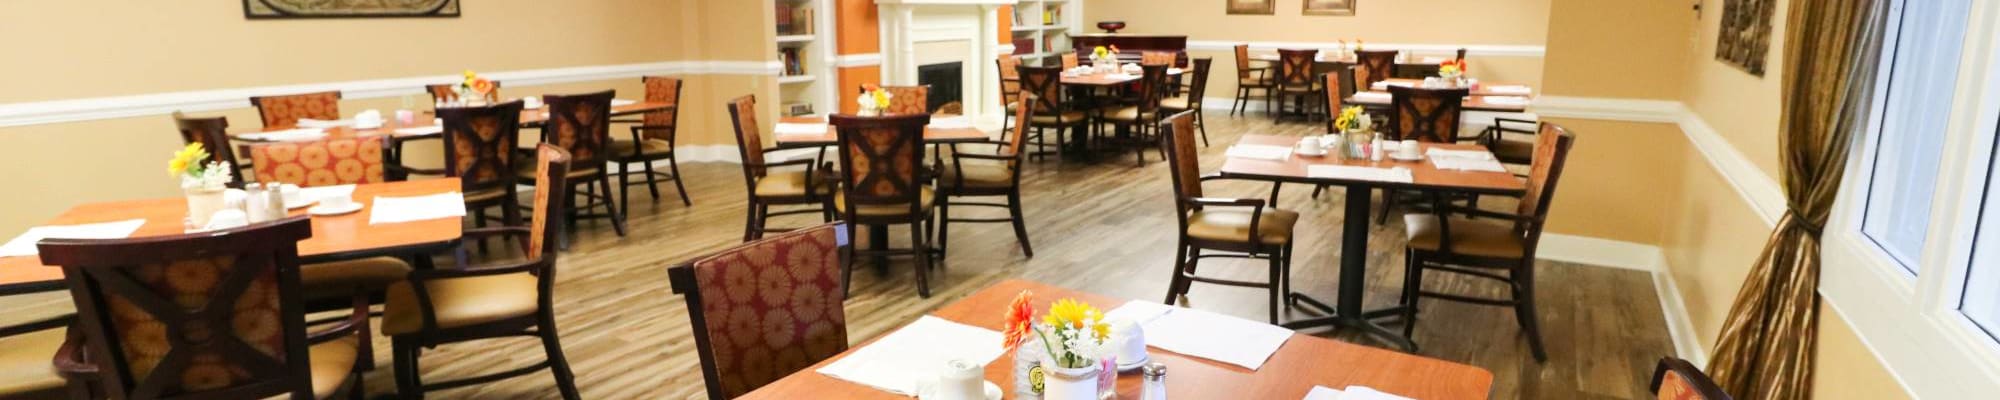 Services & Amenities at The Crossings at Ironbridge in Chester, Virginia